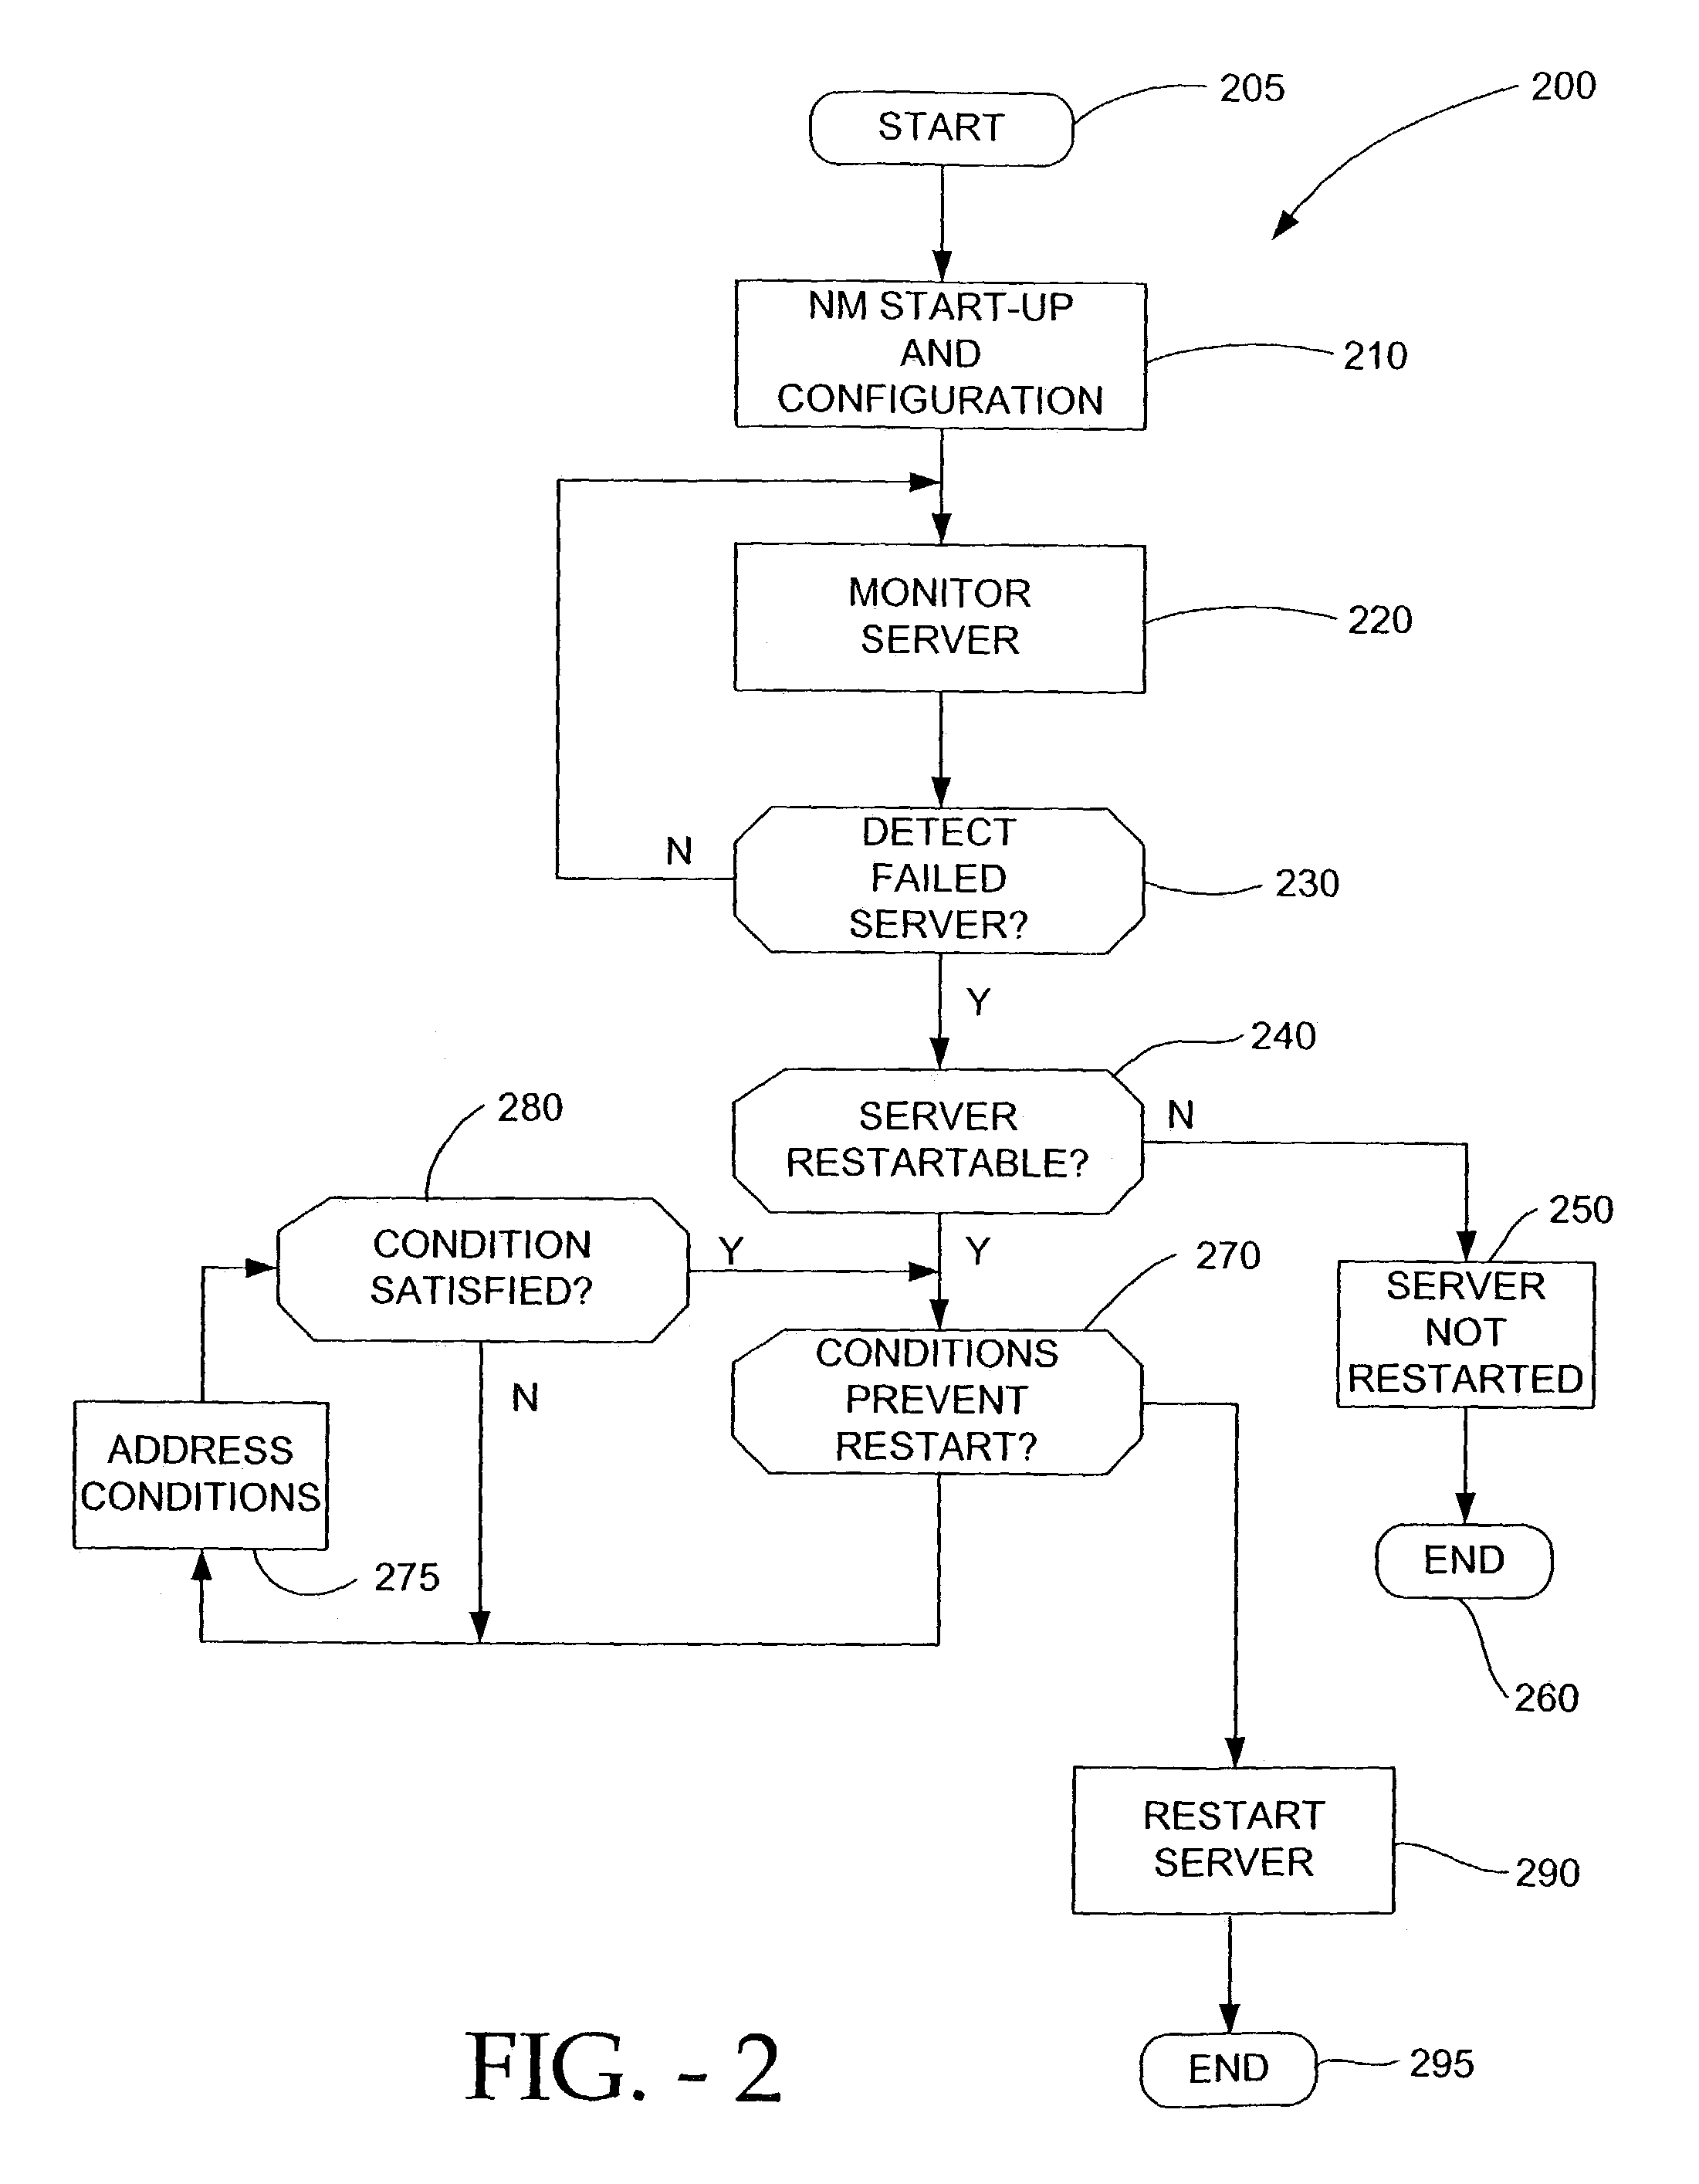 Method for automatic monitoring of managed server health